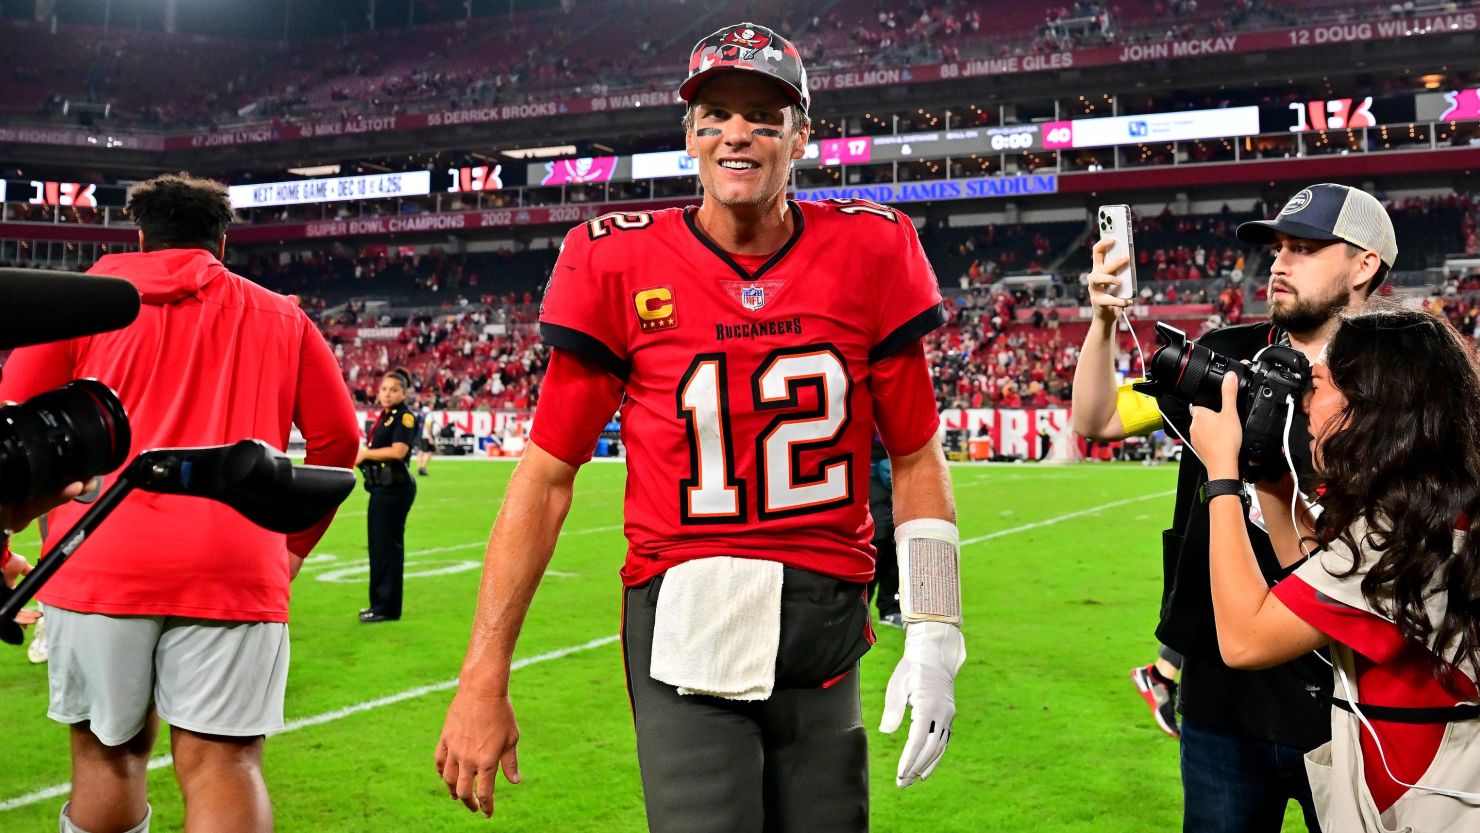 Brady led the Tampa Bay Buccaneers to a stunning comeback win against the New Orleans Saints.